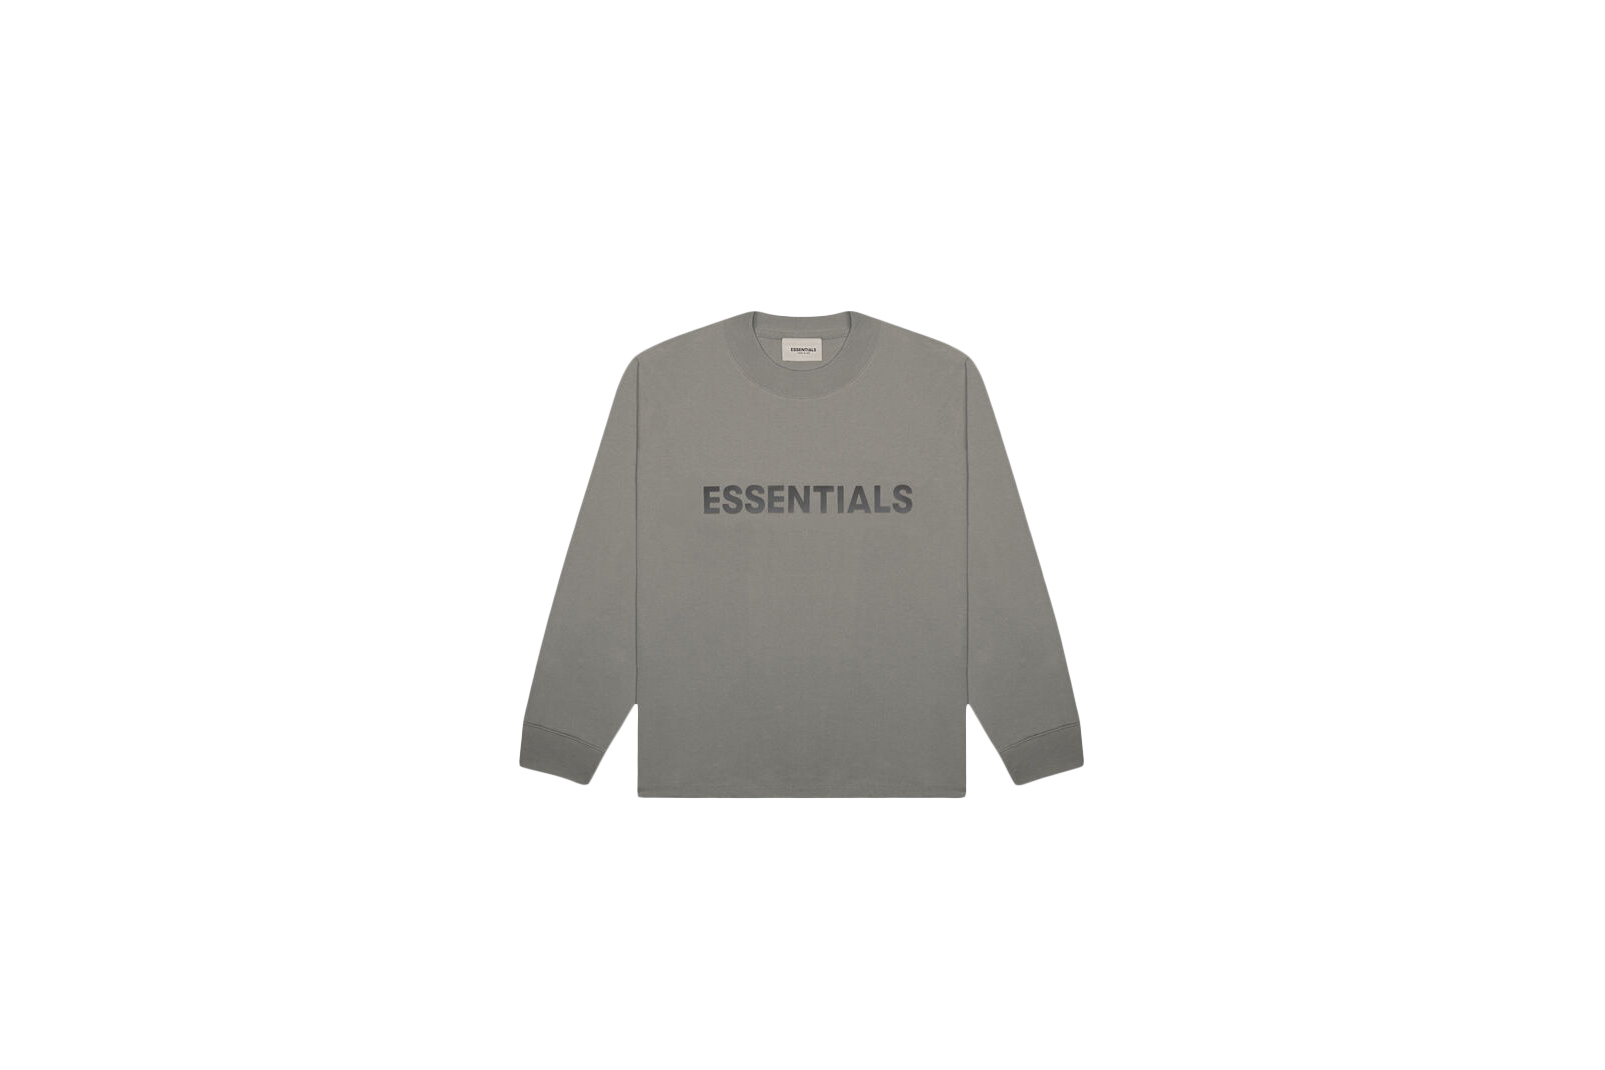 FEAR OF GOD ESSENTIALS 3D Silicon Applique Boxy Long Sleeve T-Shirt Gray  Flannel/Charcoal